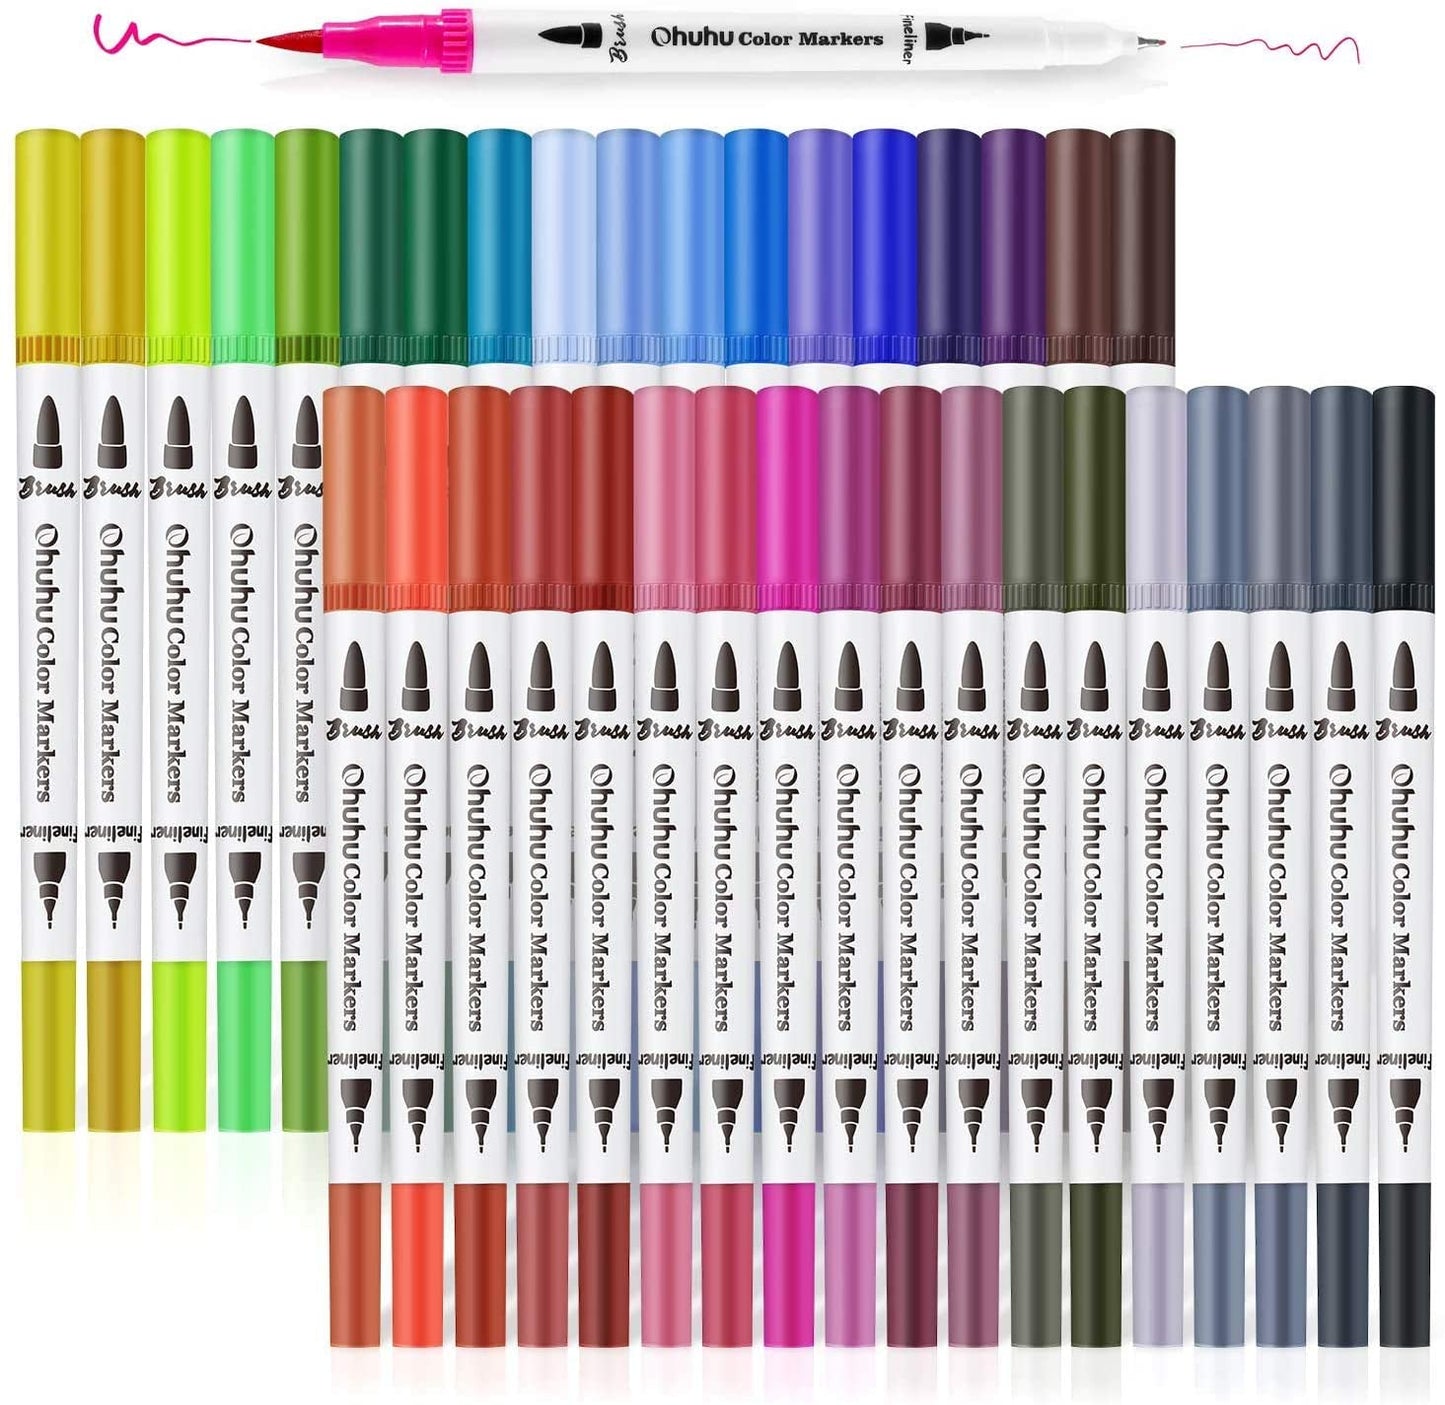 Ohuhu Maui Series 36 Colors Water Based Dual Tipped Brush Markers for – JG  Superstore